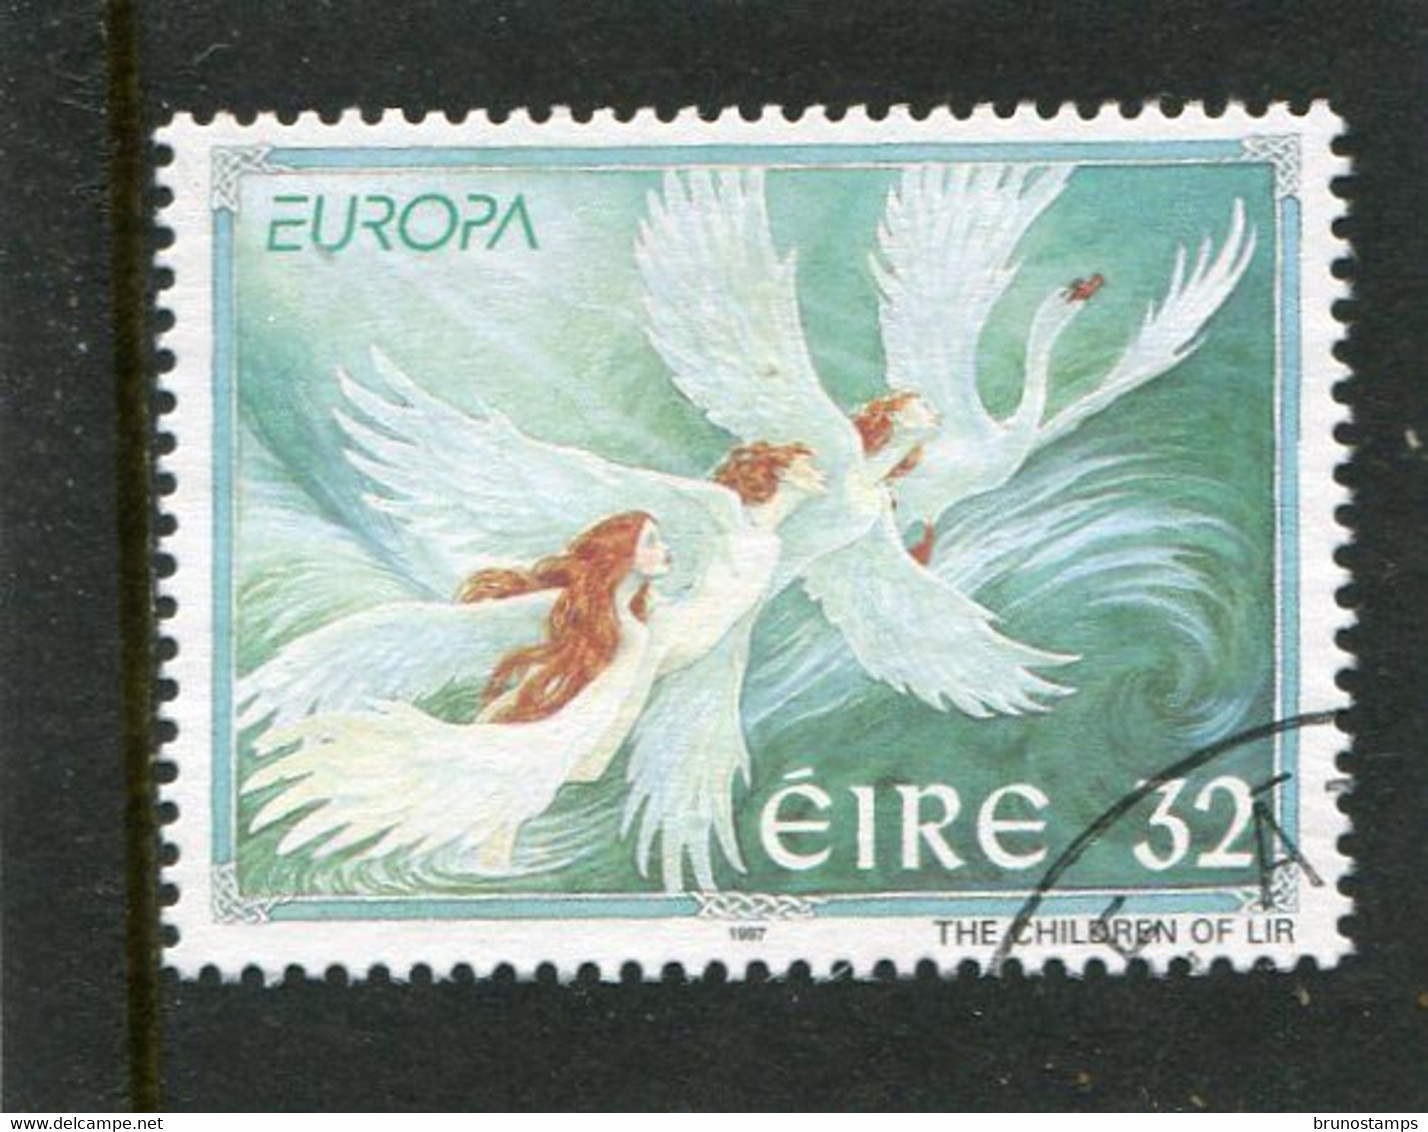 IRELAND/EIRE - 1997  32p  EUROPA  FINE USED - Used Stamps